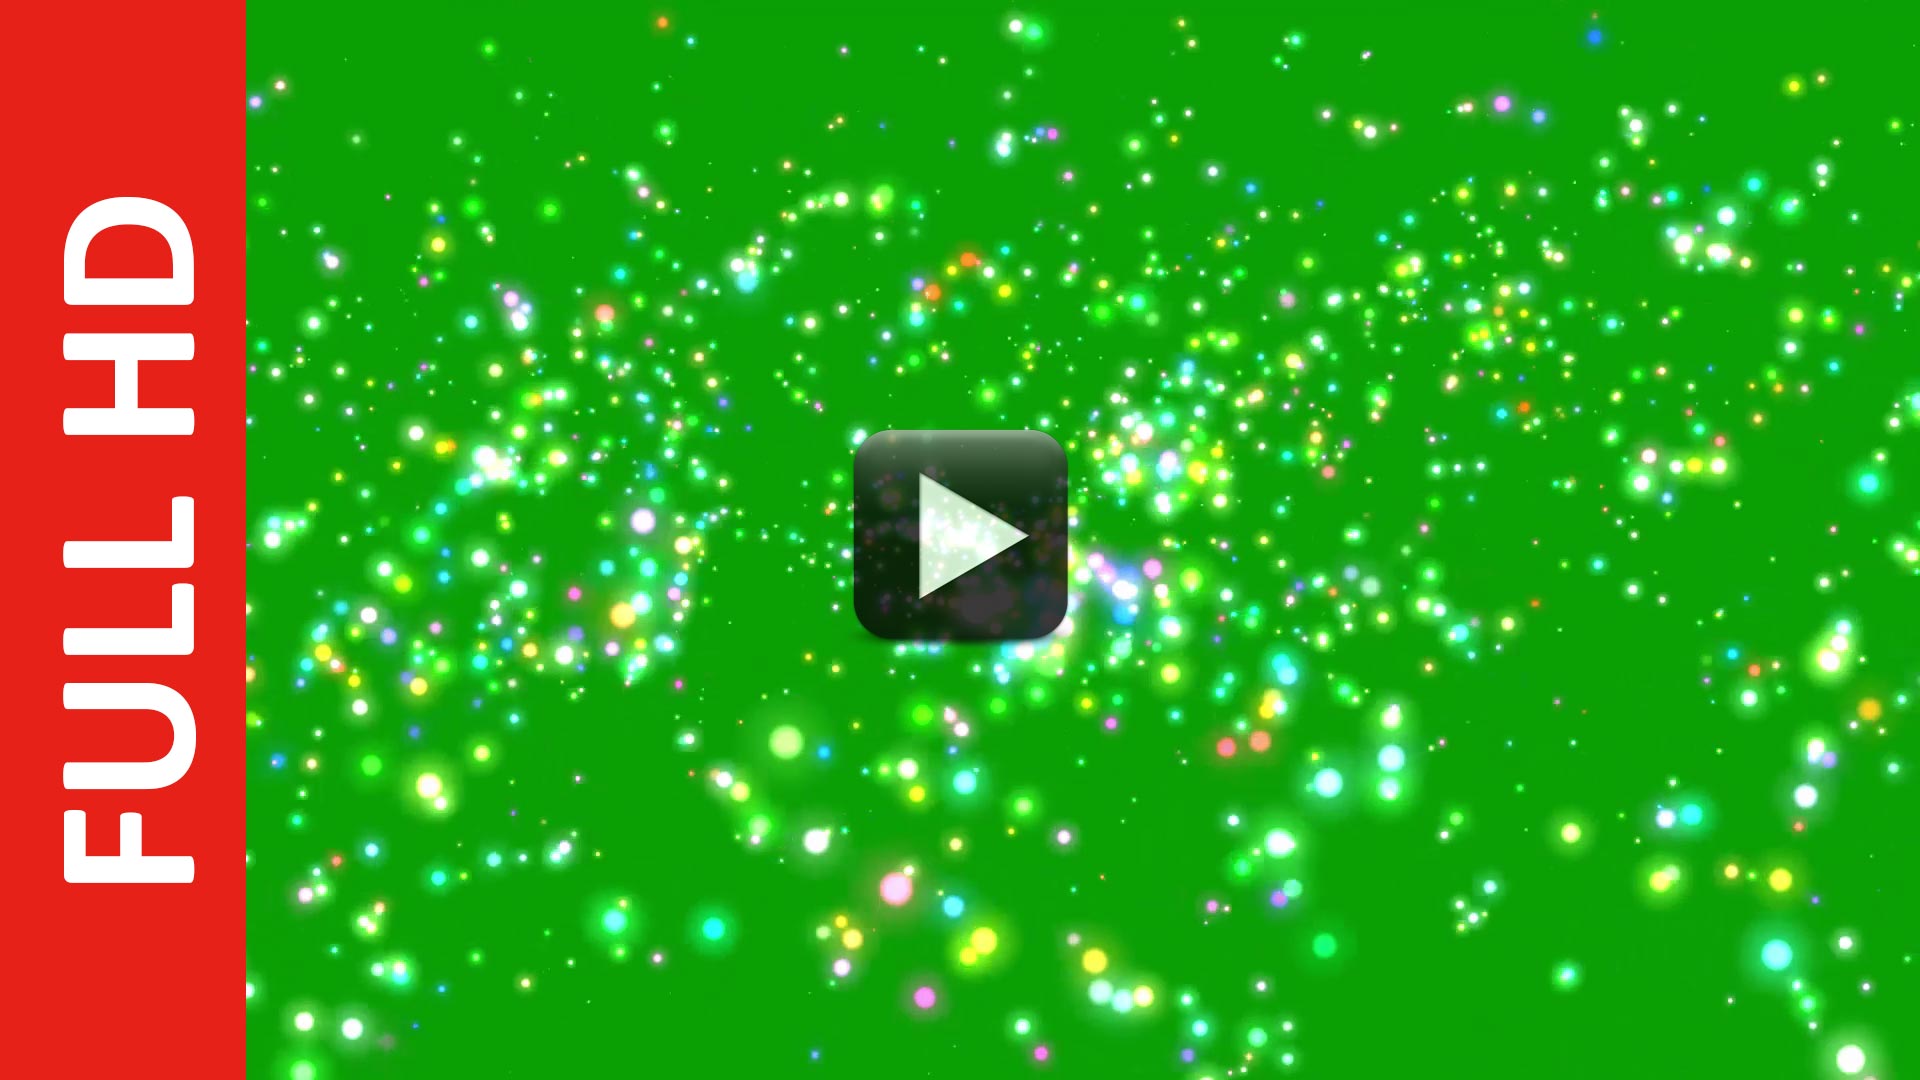 Particles Glitter Stars In The Universe Green Screen Background All Design Creative